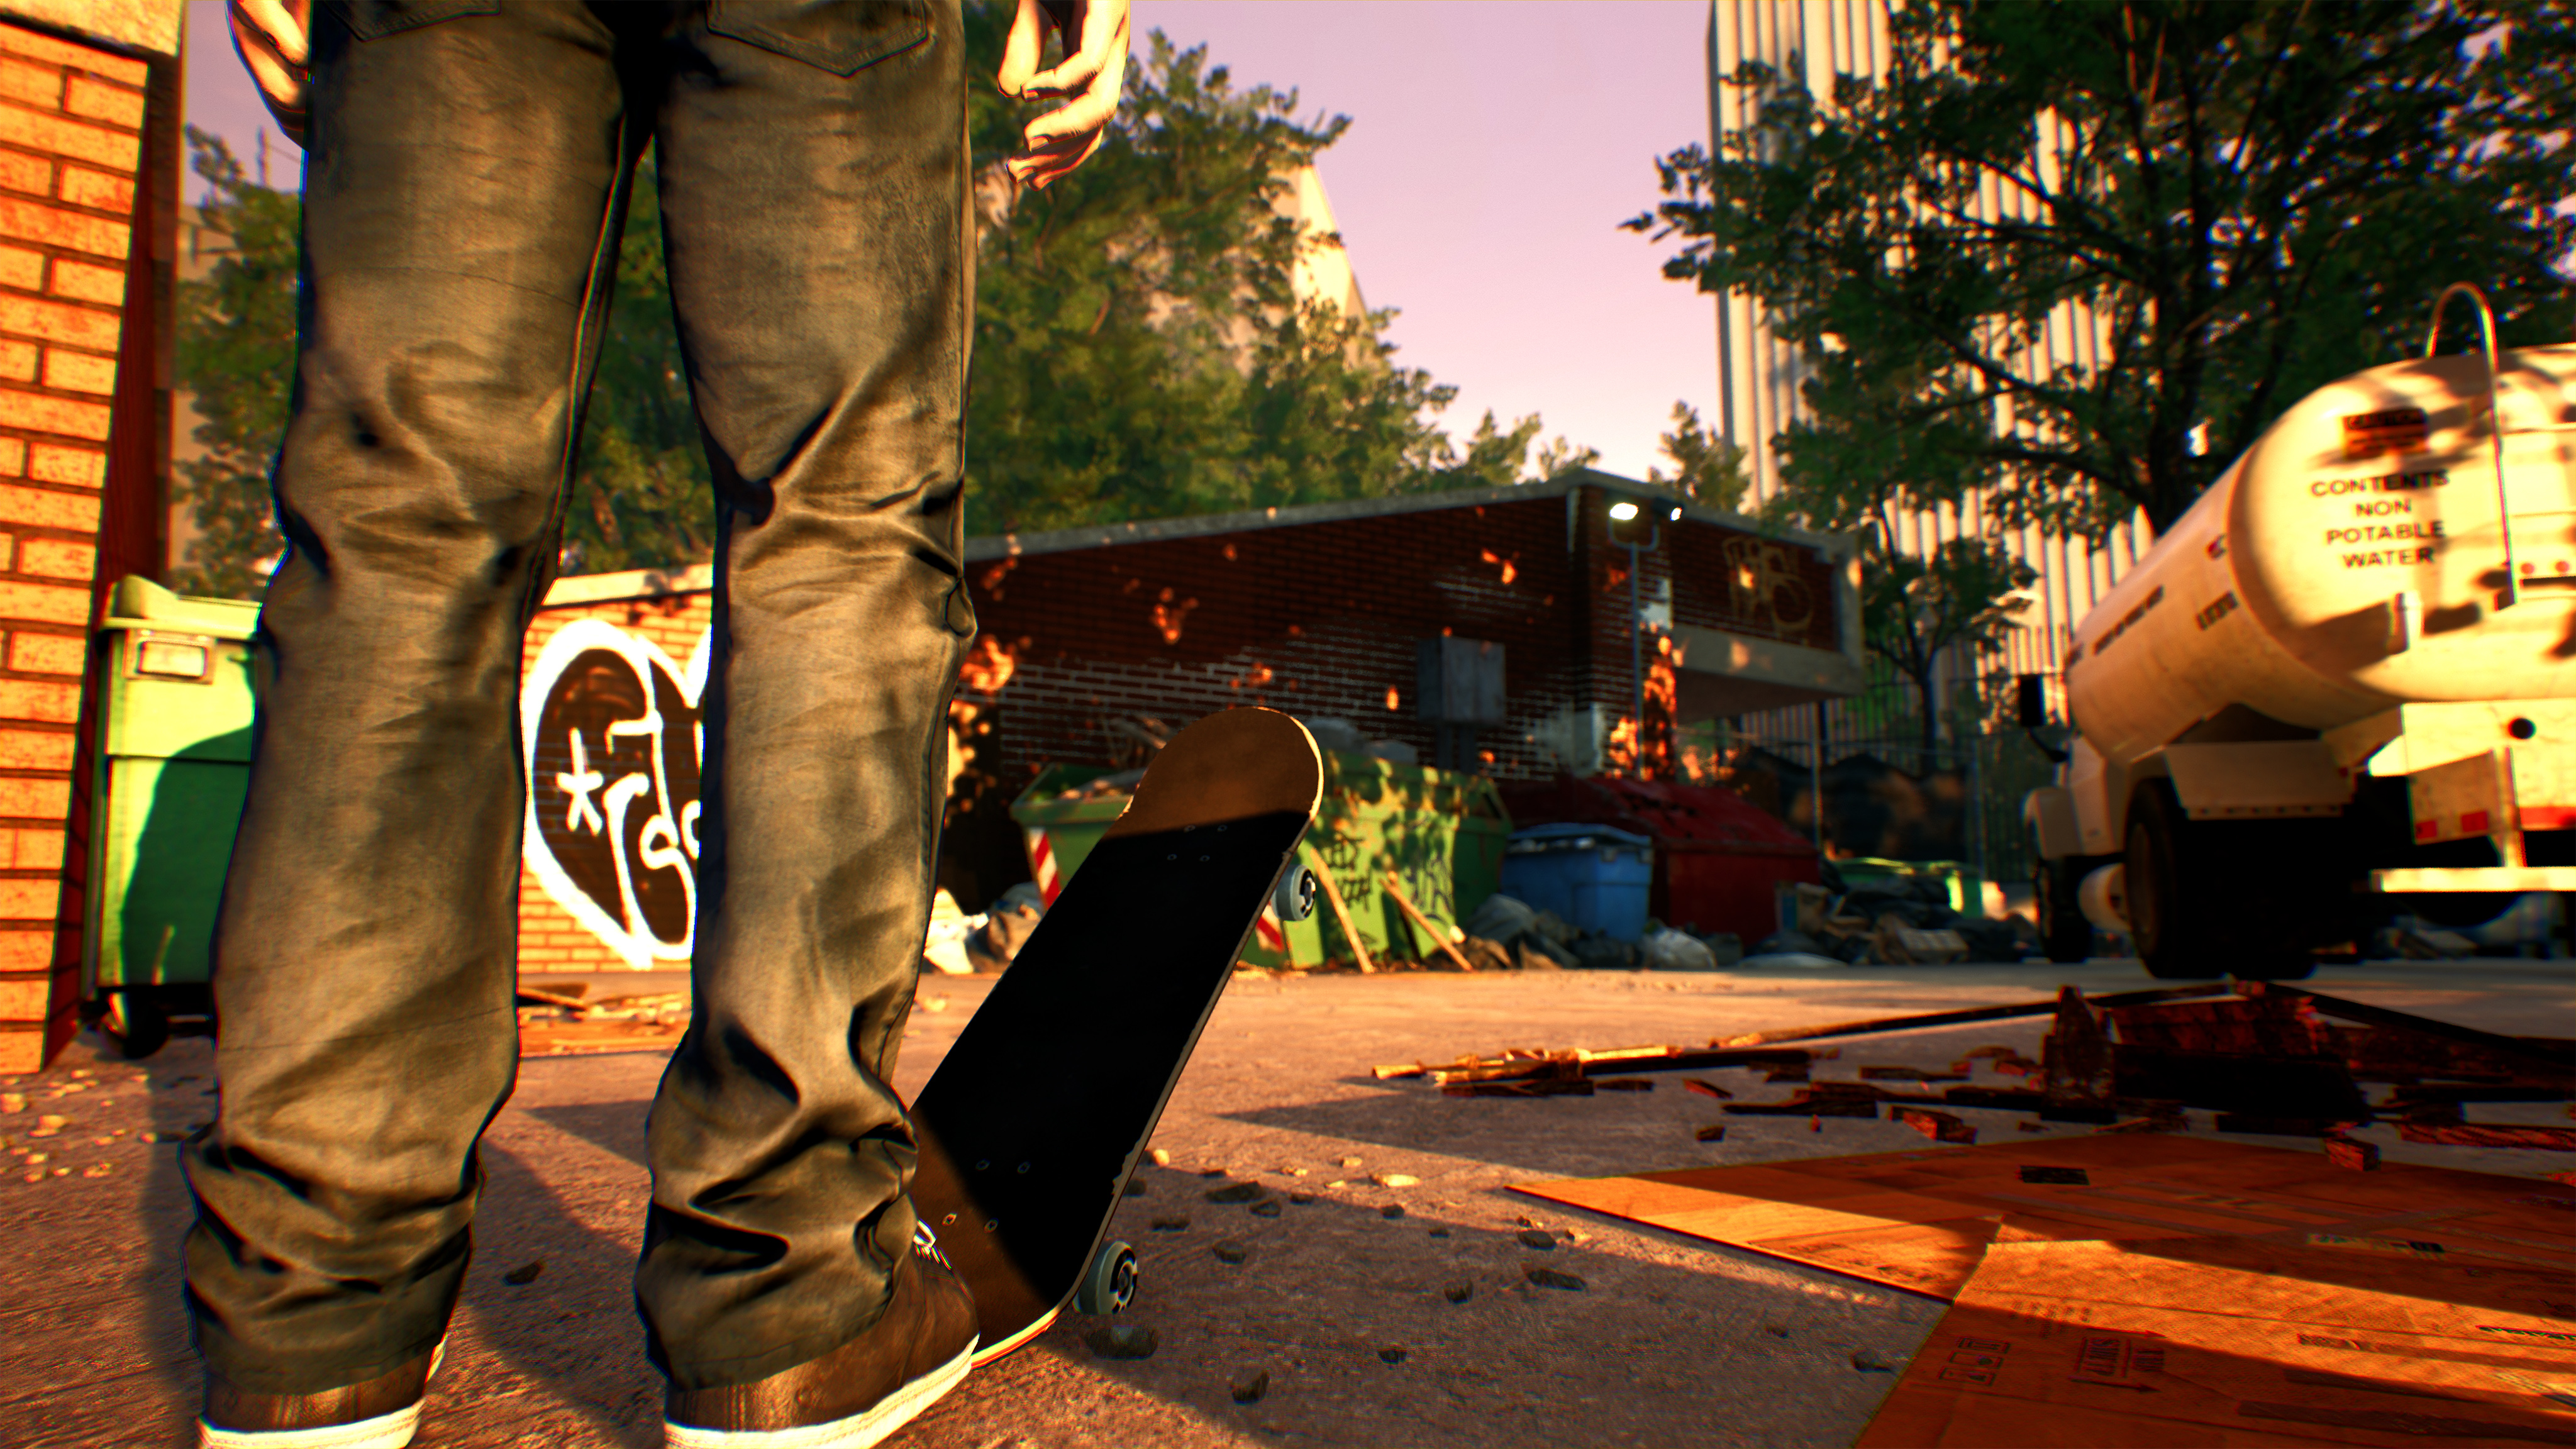 Expected games. Session: Skate SIM. Session Skateboarding SIM. Session: Skate SIM игра. Session: Skateboarding SIM game.